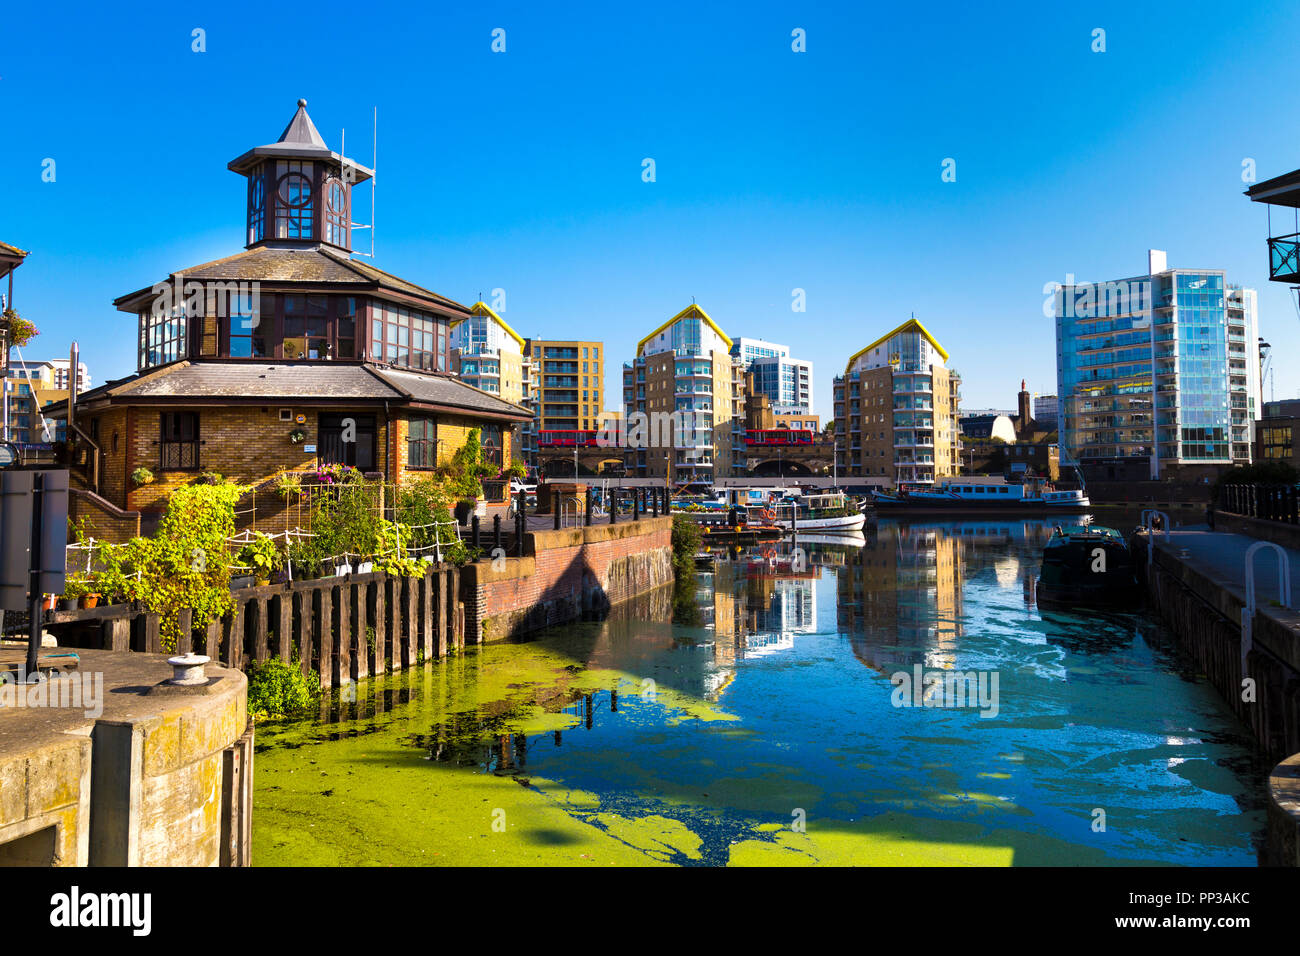 View of the Limehouse Basin from the lock, residential buildings by Limehouse Marina, London, UK Stock Photo